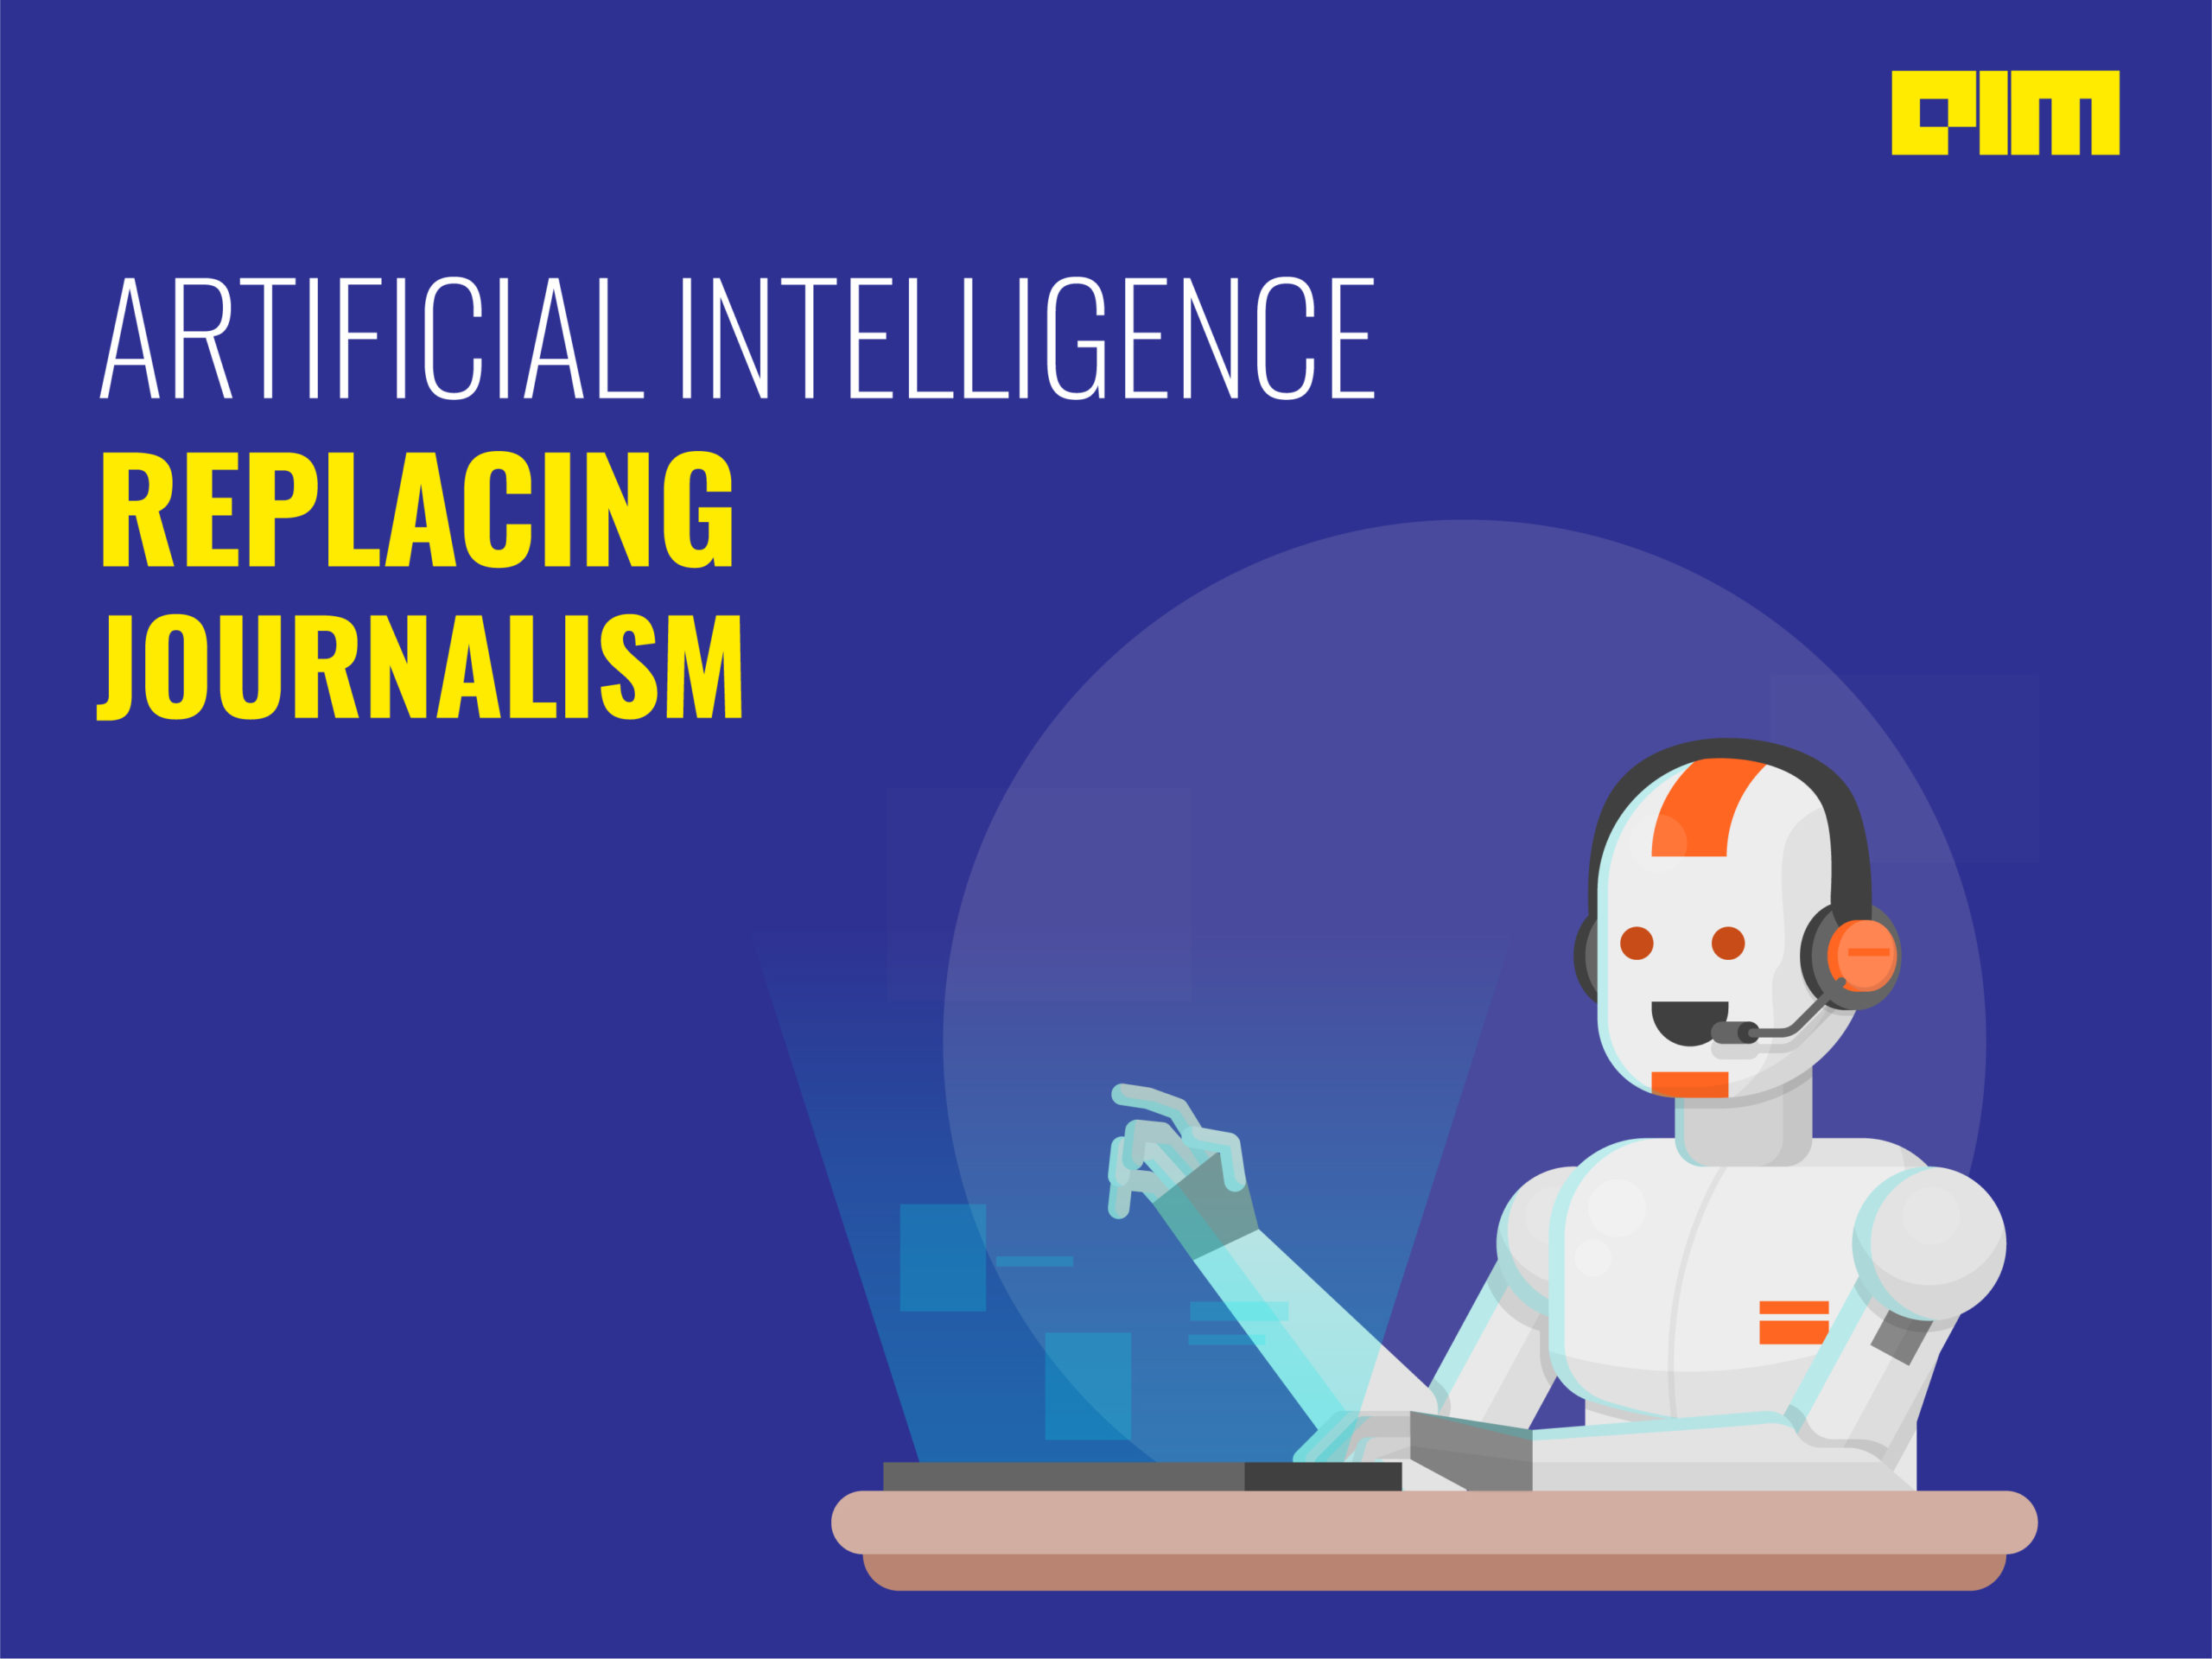 Microsoft Replaces Journalists With AI. Can We Rely On AI For News?